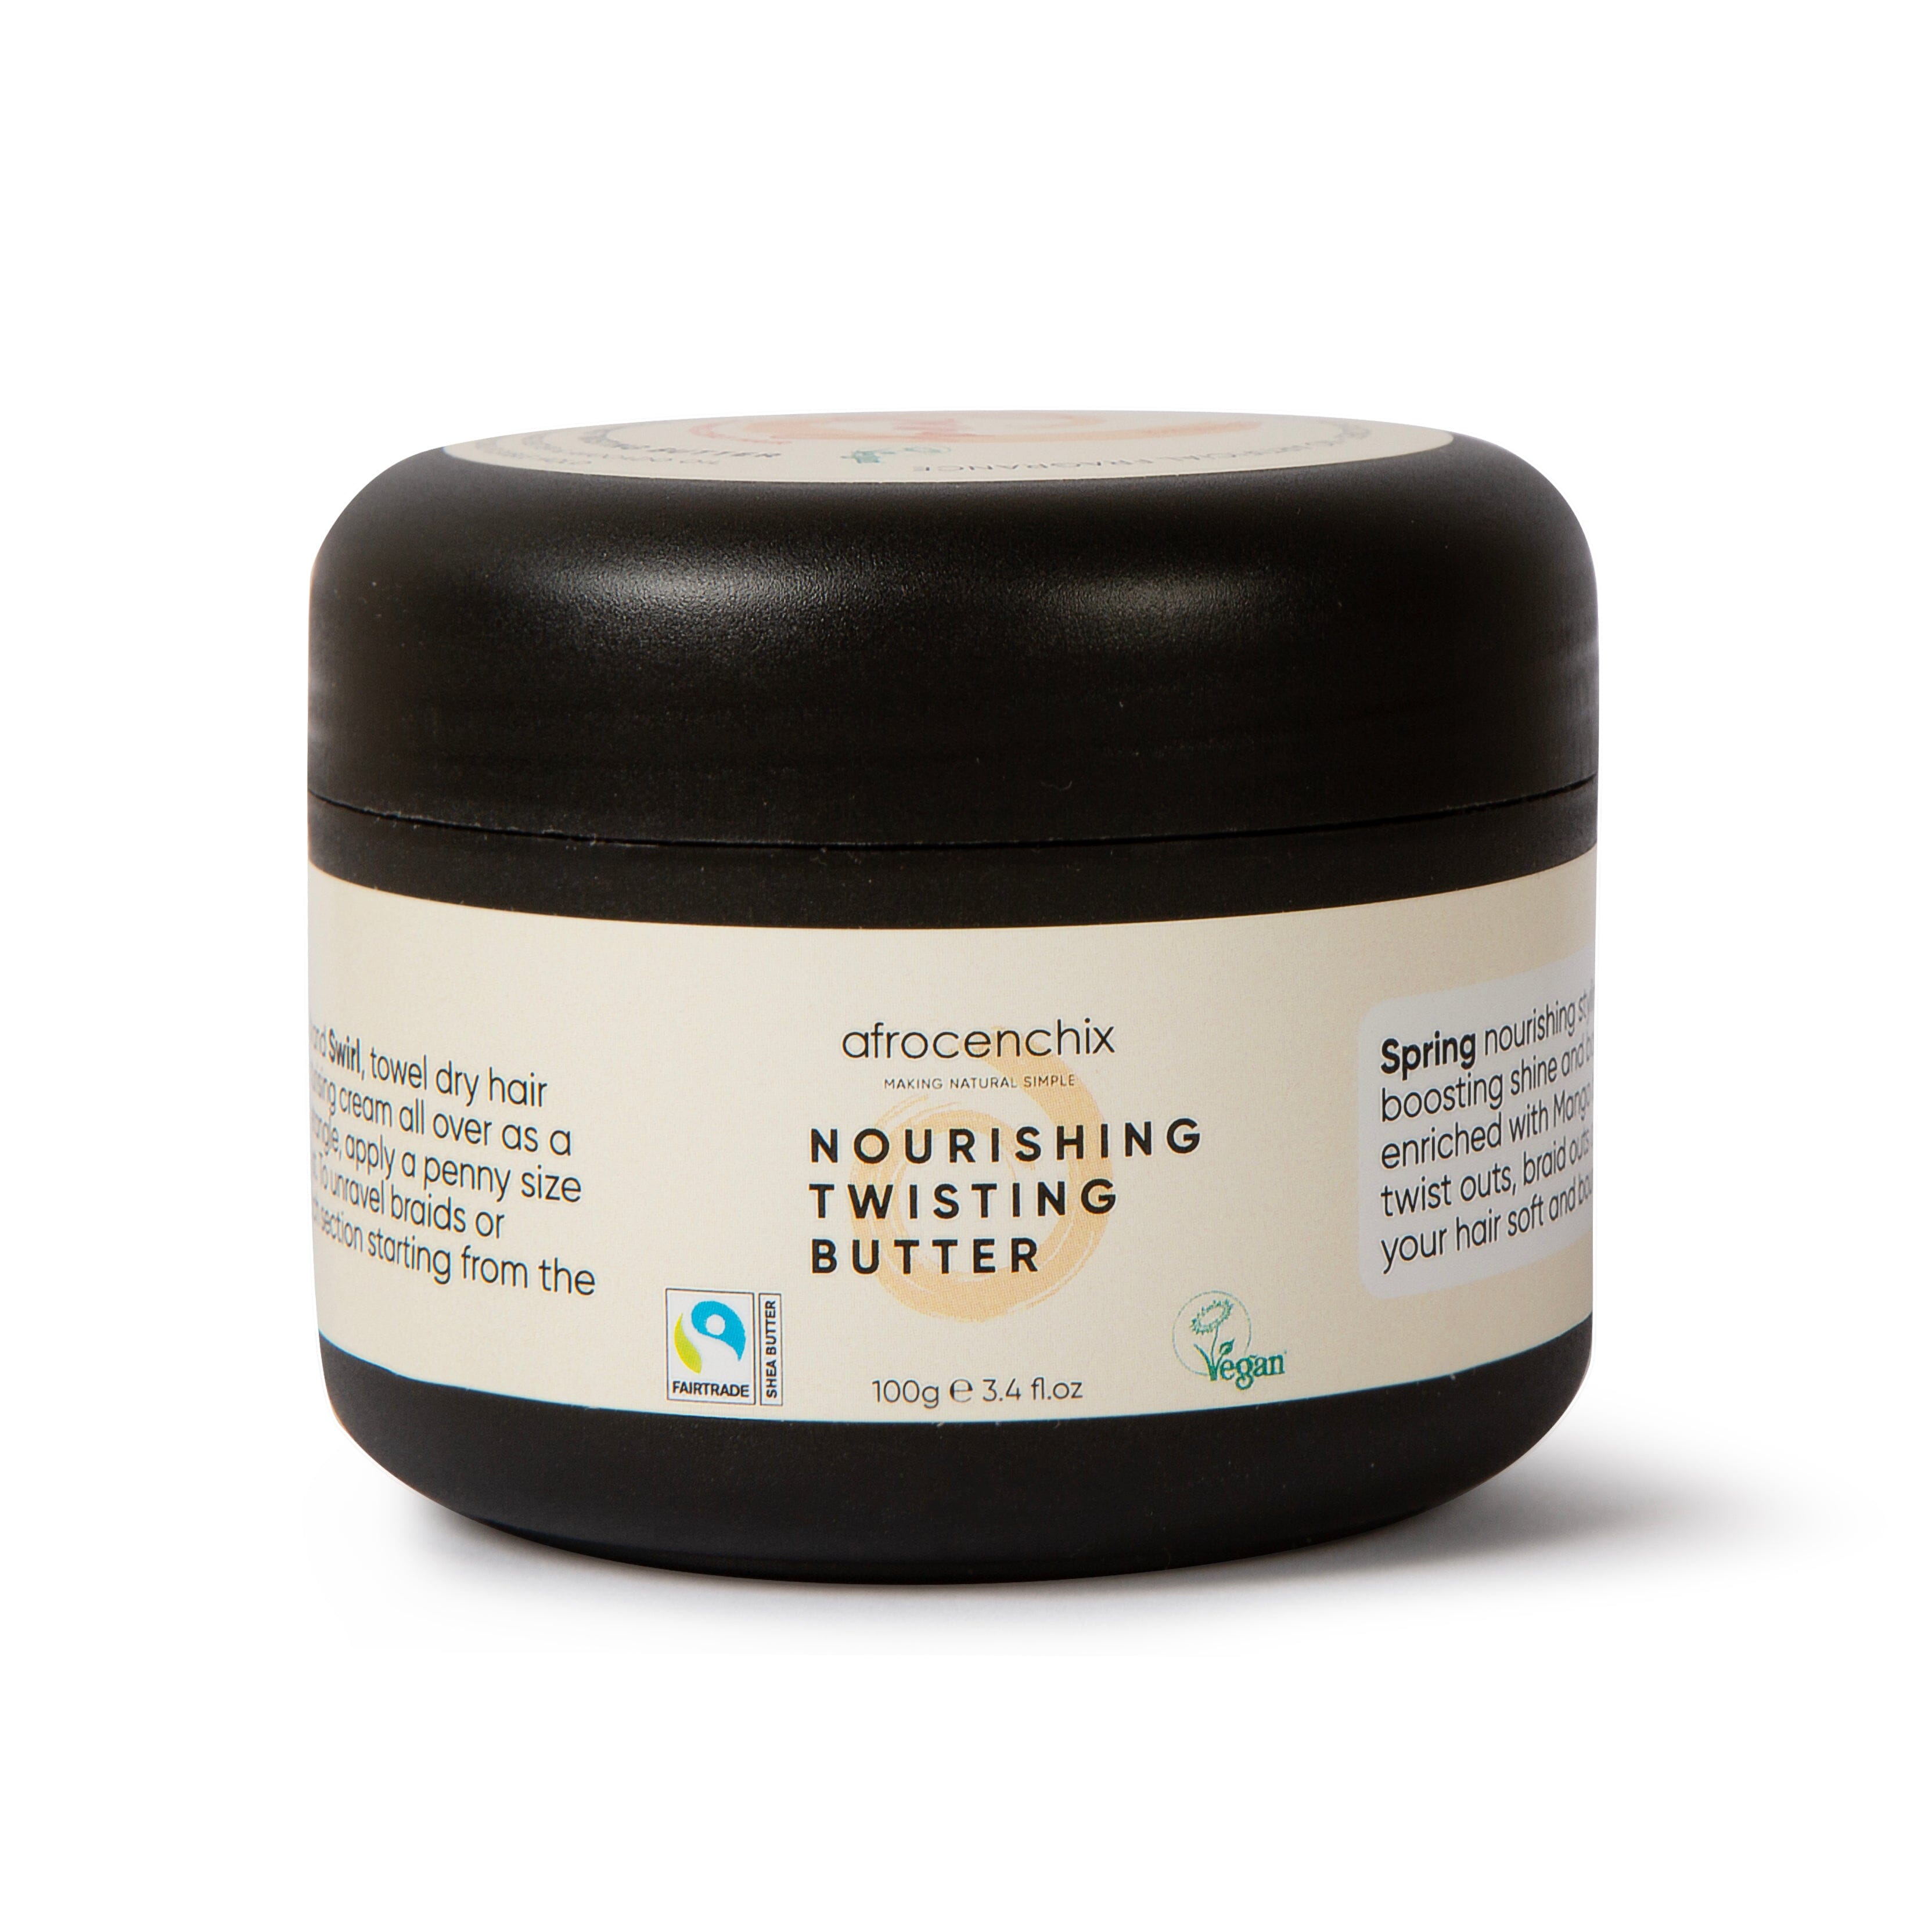 Natural Fairtrade Twisting Butter - Spring